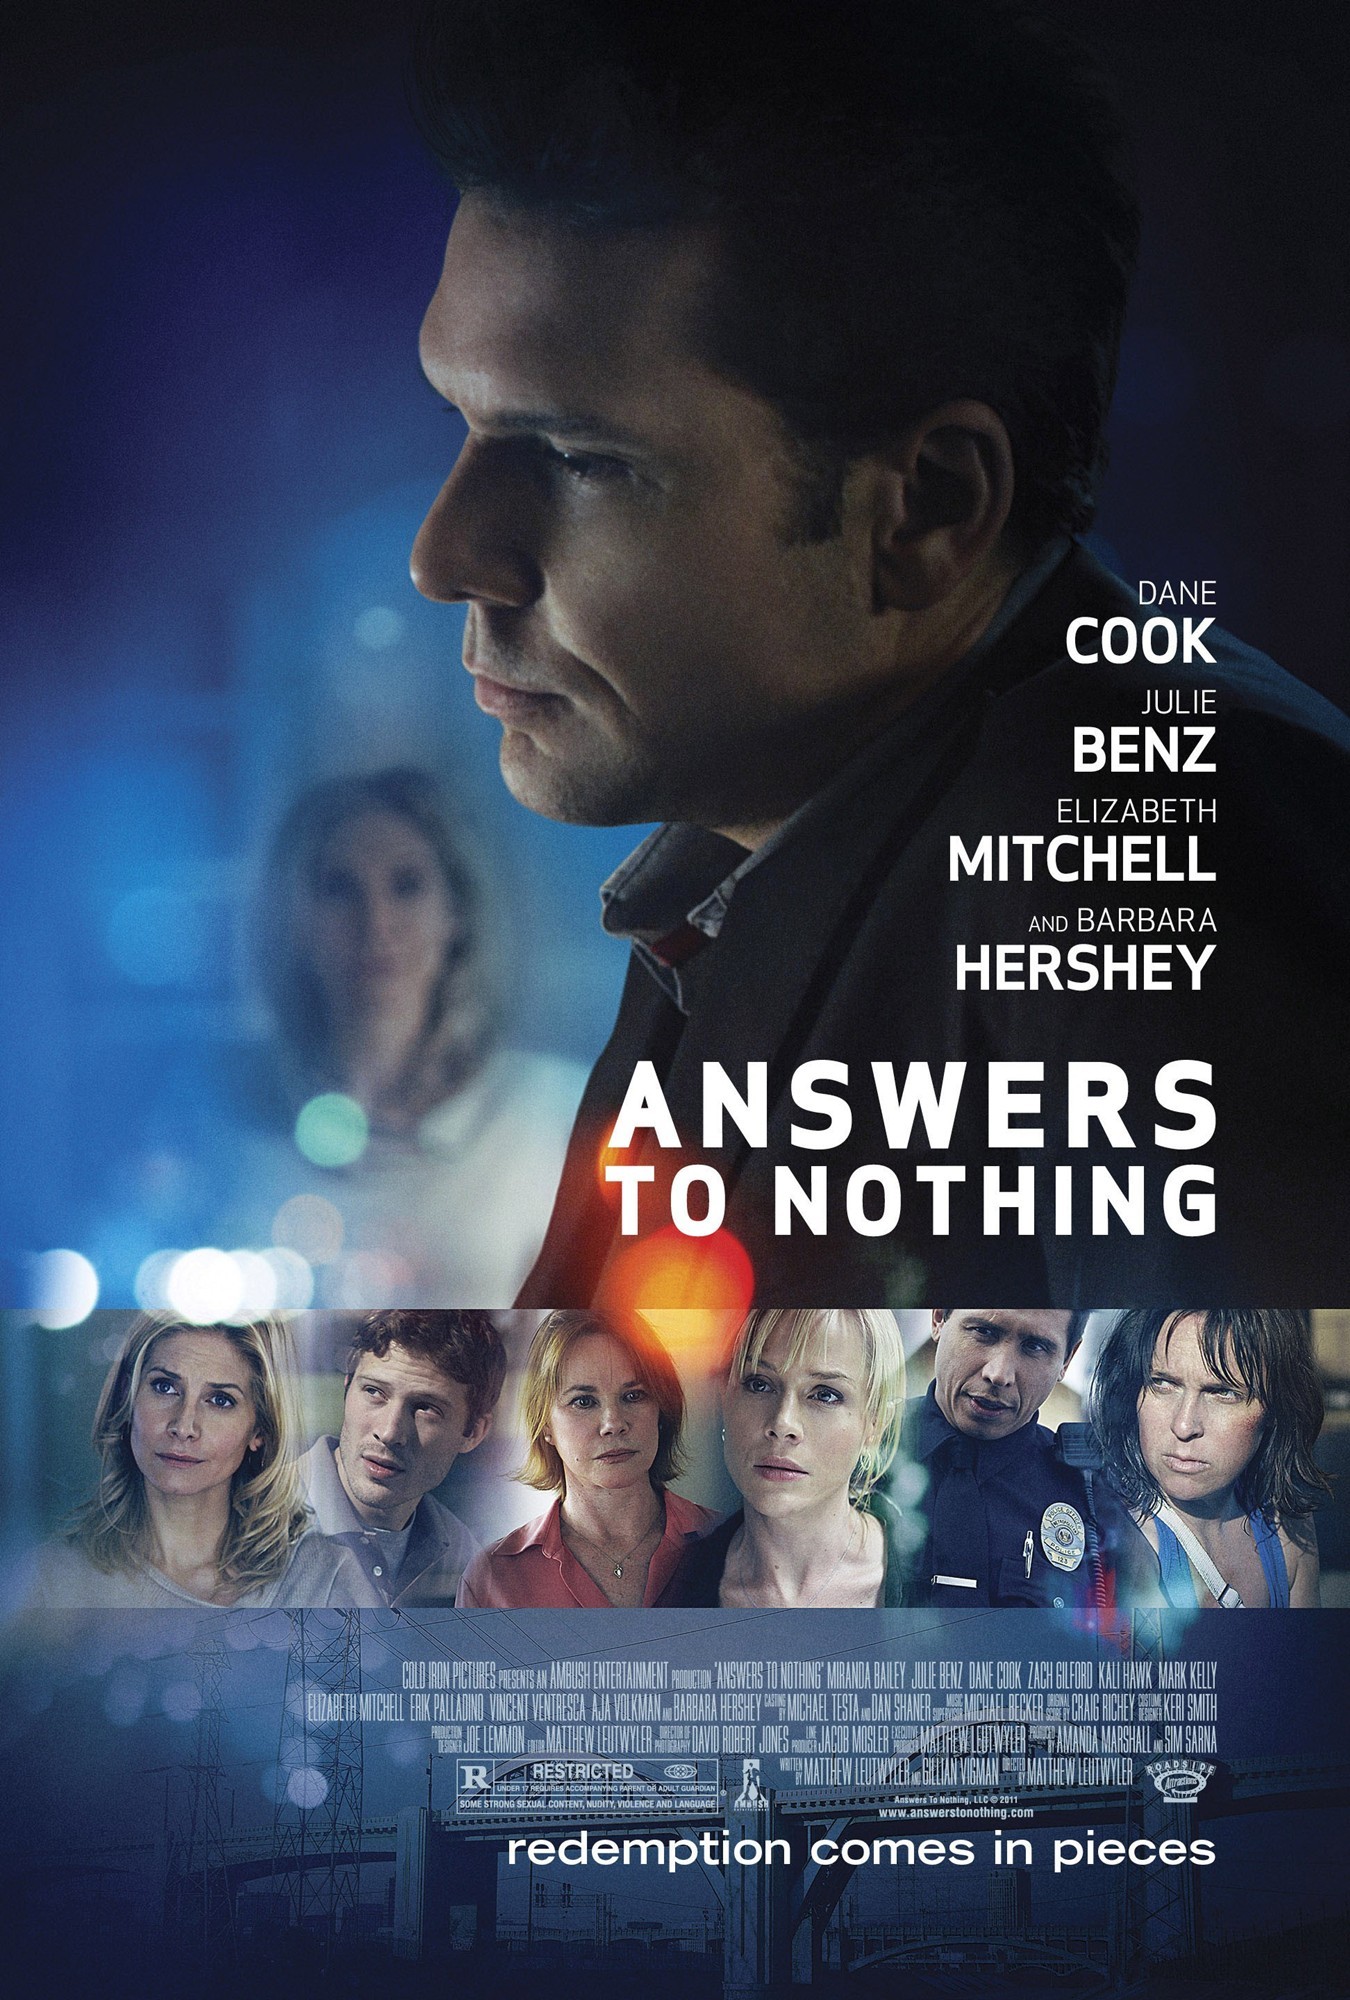 Poster of Roadside Attractions' Answers to Nothing (2011)